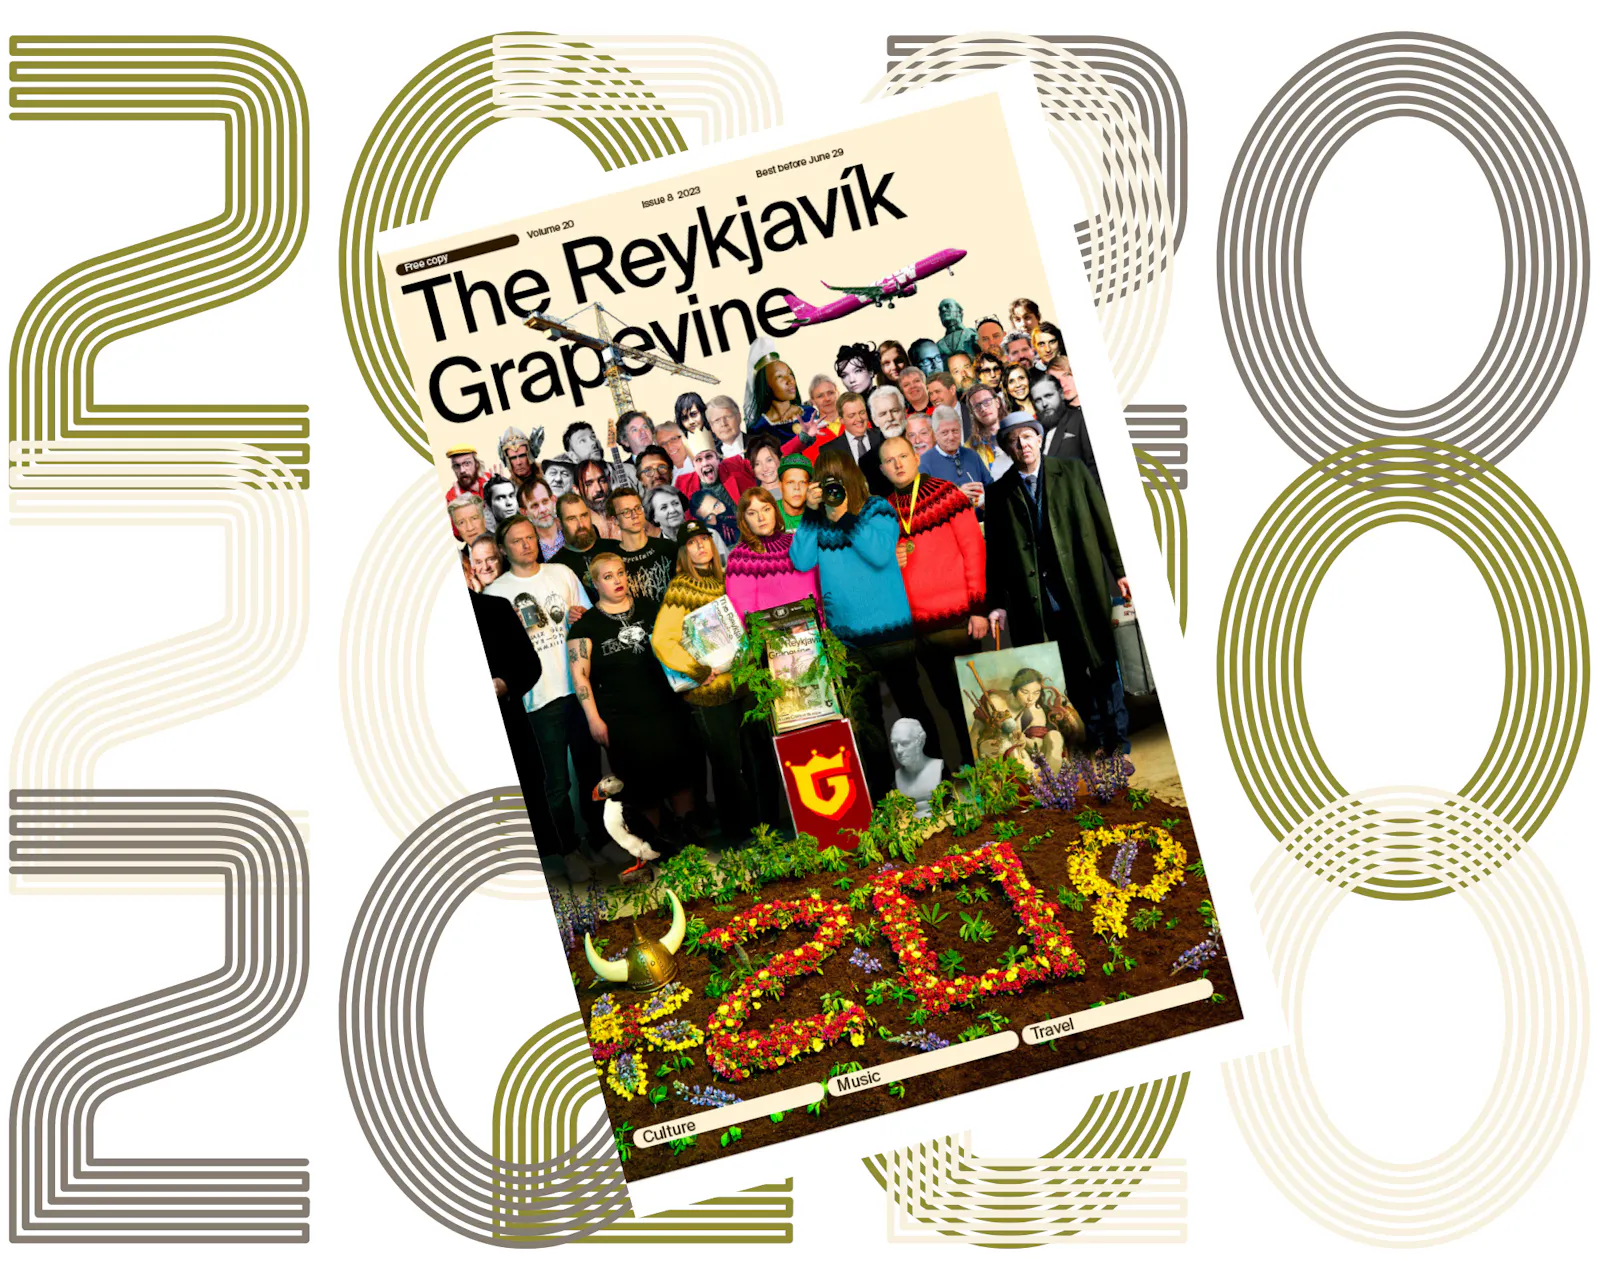 Issue 8, Vol. 20 cover of the Reykjavík Grapevine